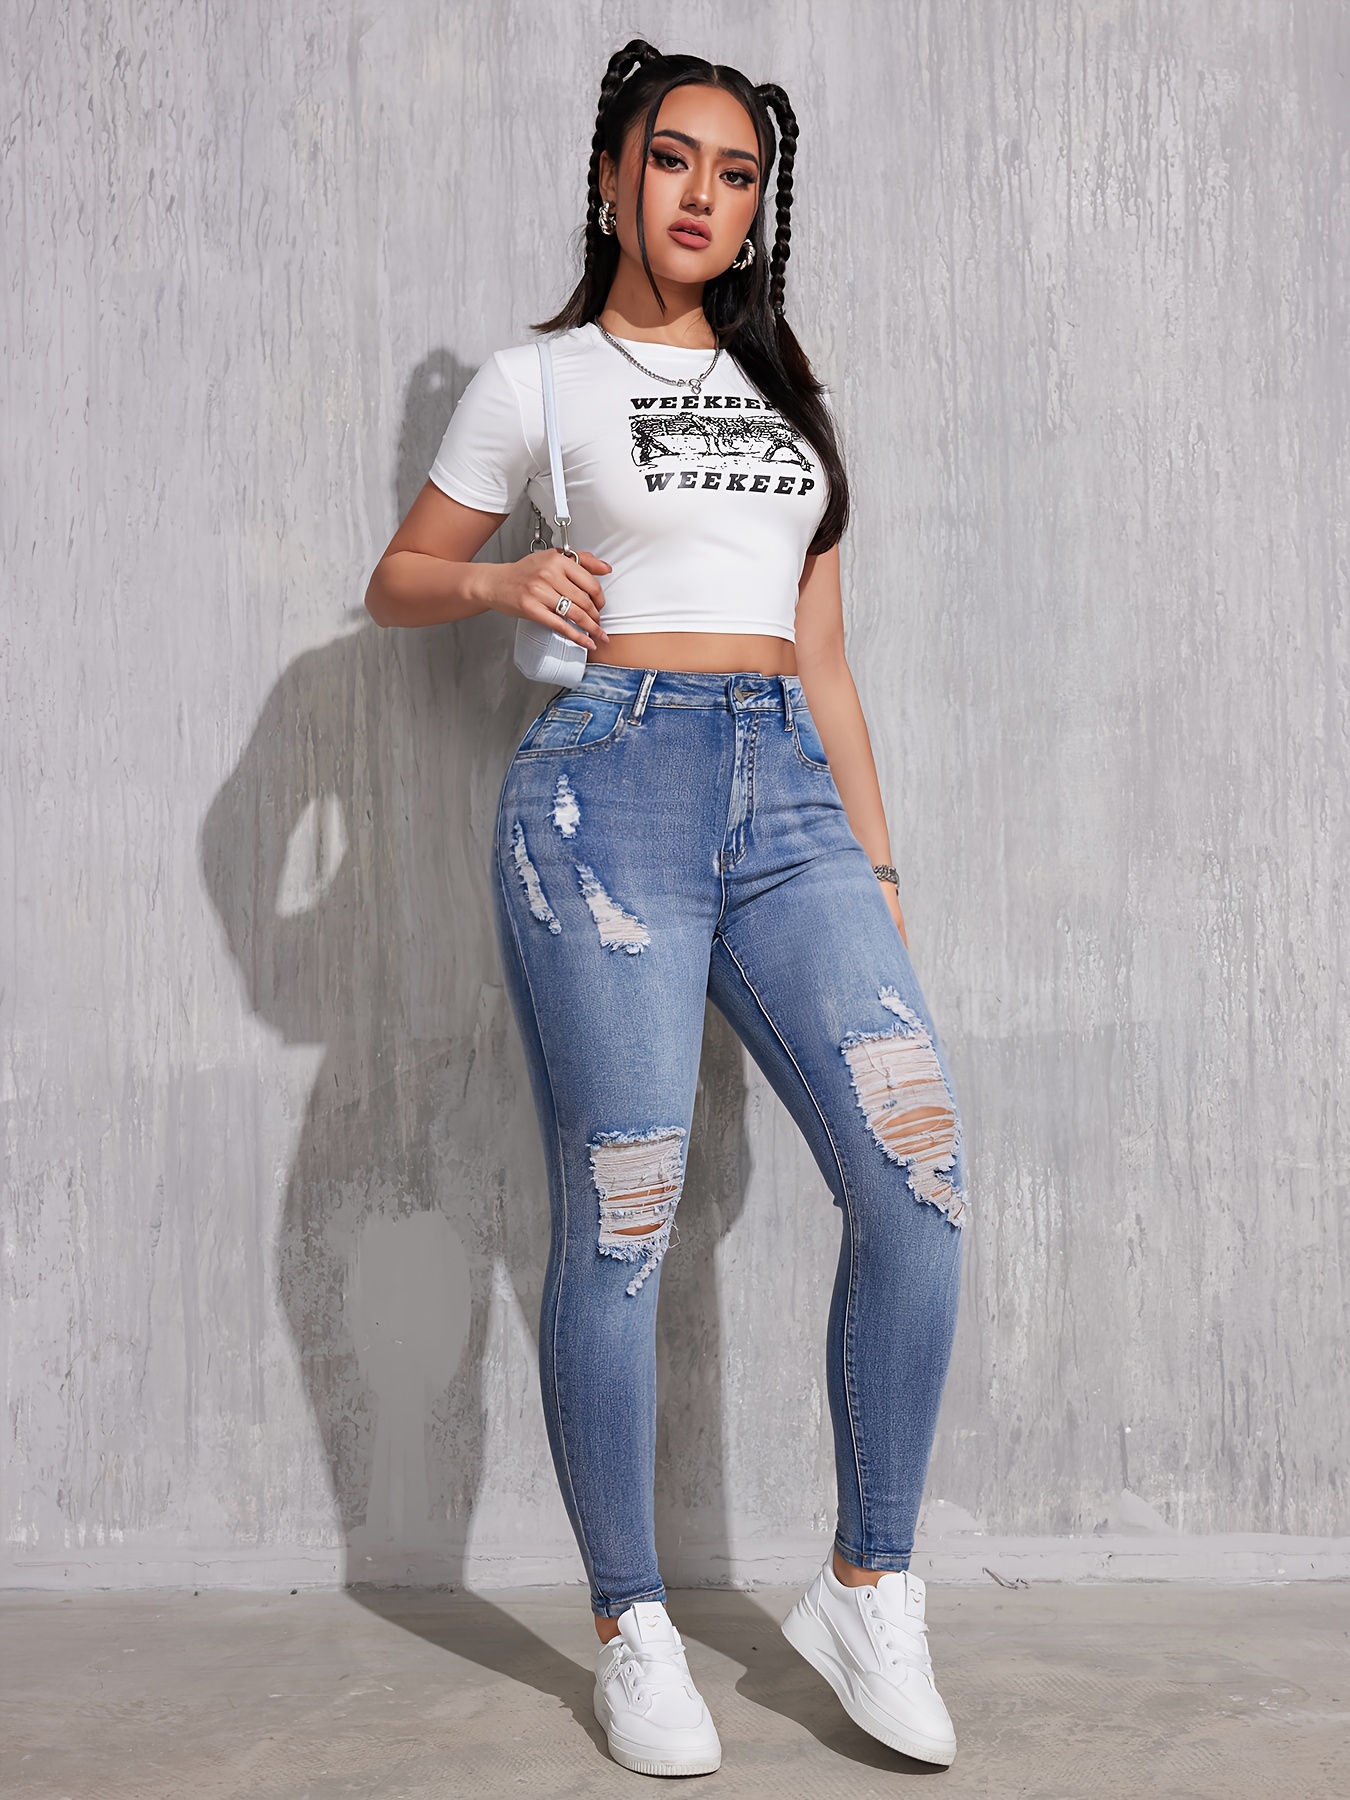 Blue Ripped Skinny Fit Jeans, Distressed High Waist Stretchy Slash Pockets  Tight Fit Jeans, Women's Denim Jeans & Clothing